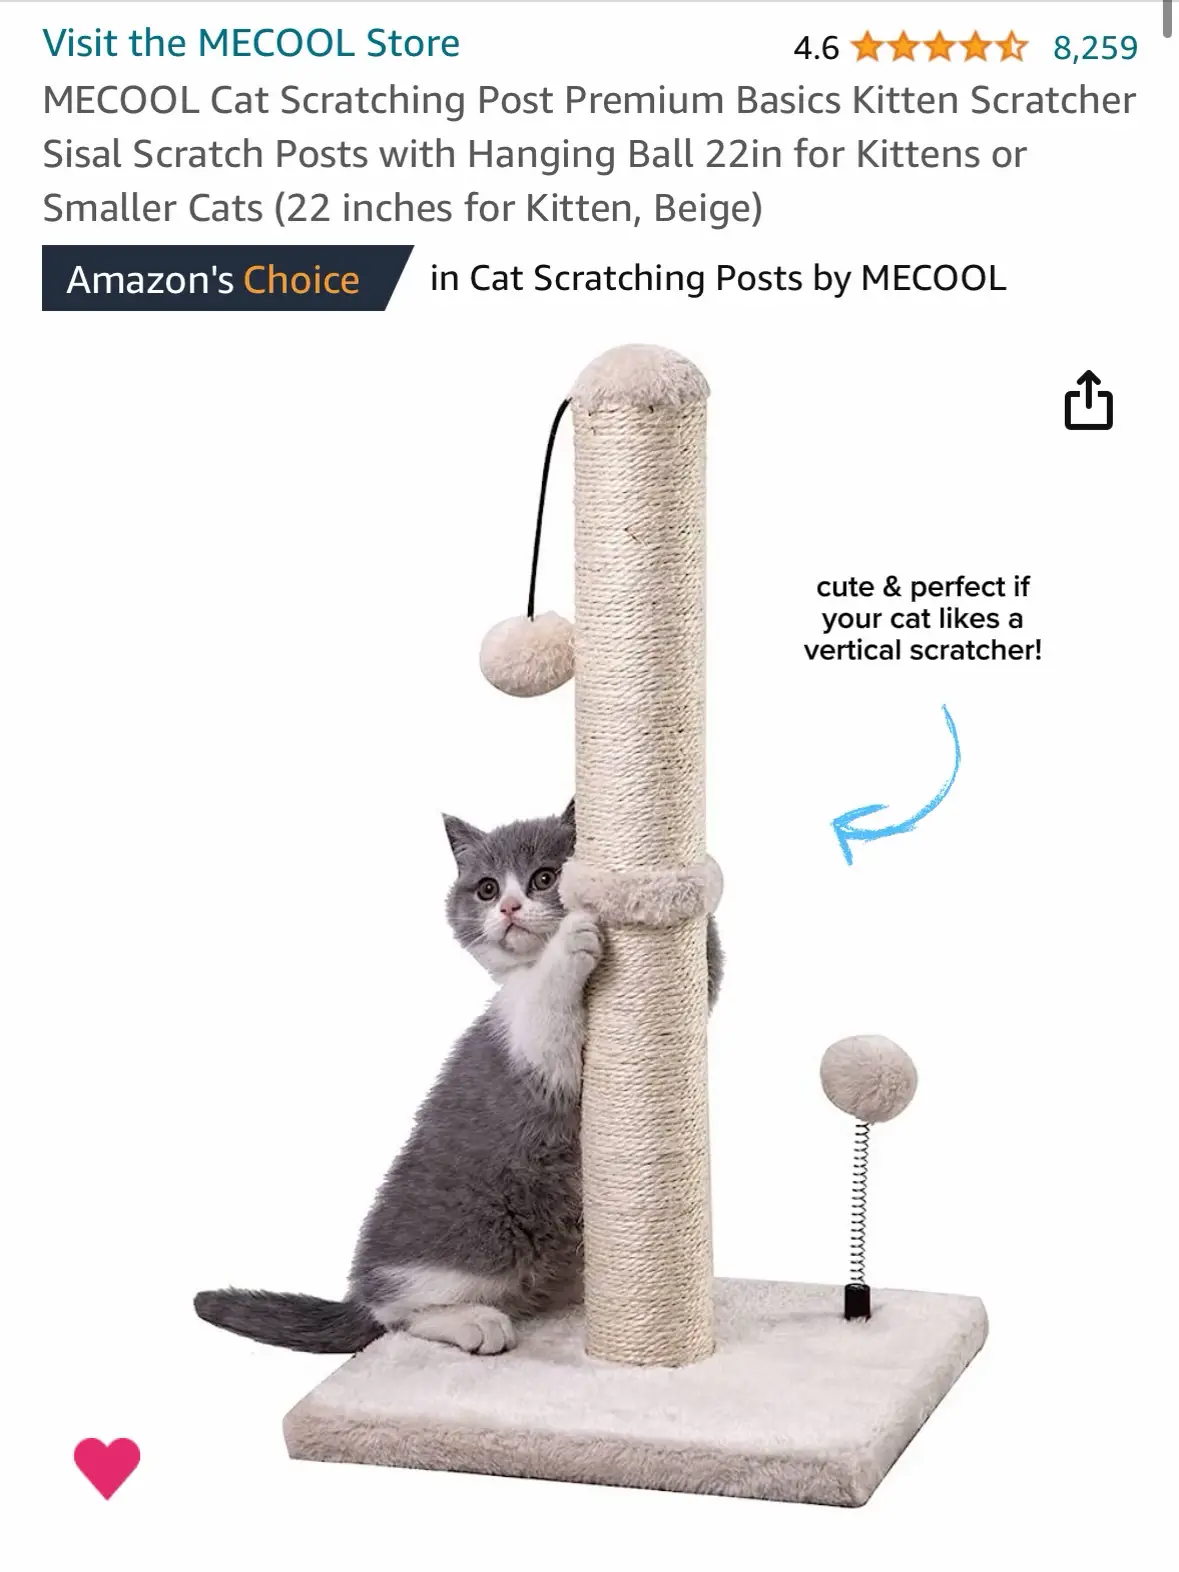 Velcro Cat Toys for Playing - Lemon8 Search